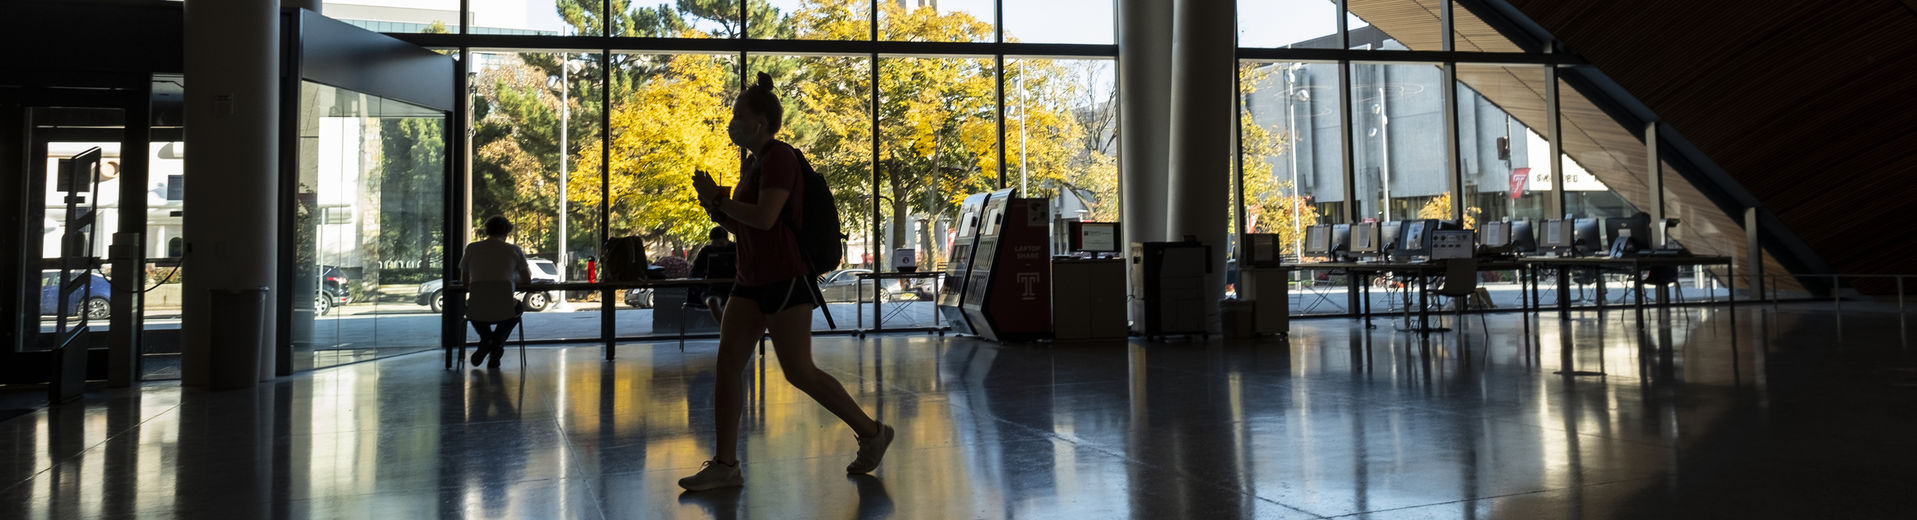 Students walking through the Charles Library lobby on Main Campus